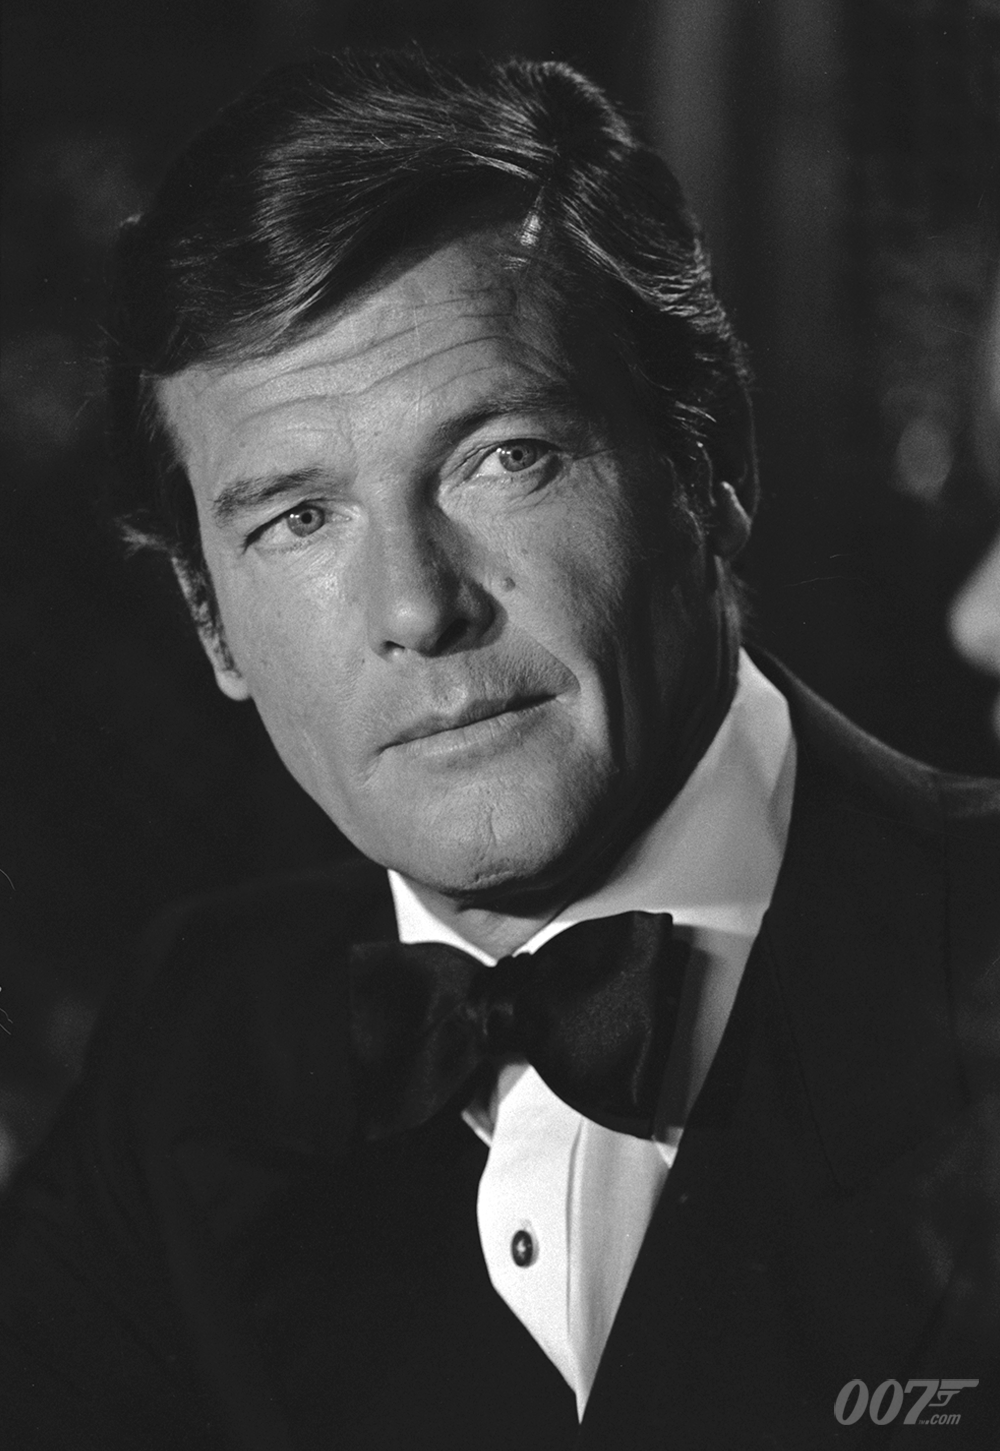 The Official James Bond 007 Website | TRIBUTES TO SIR ROGER MOORE